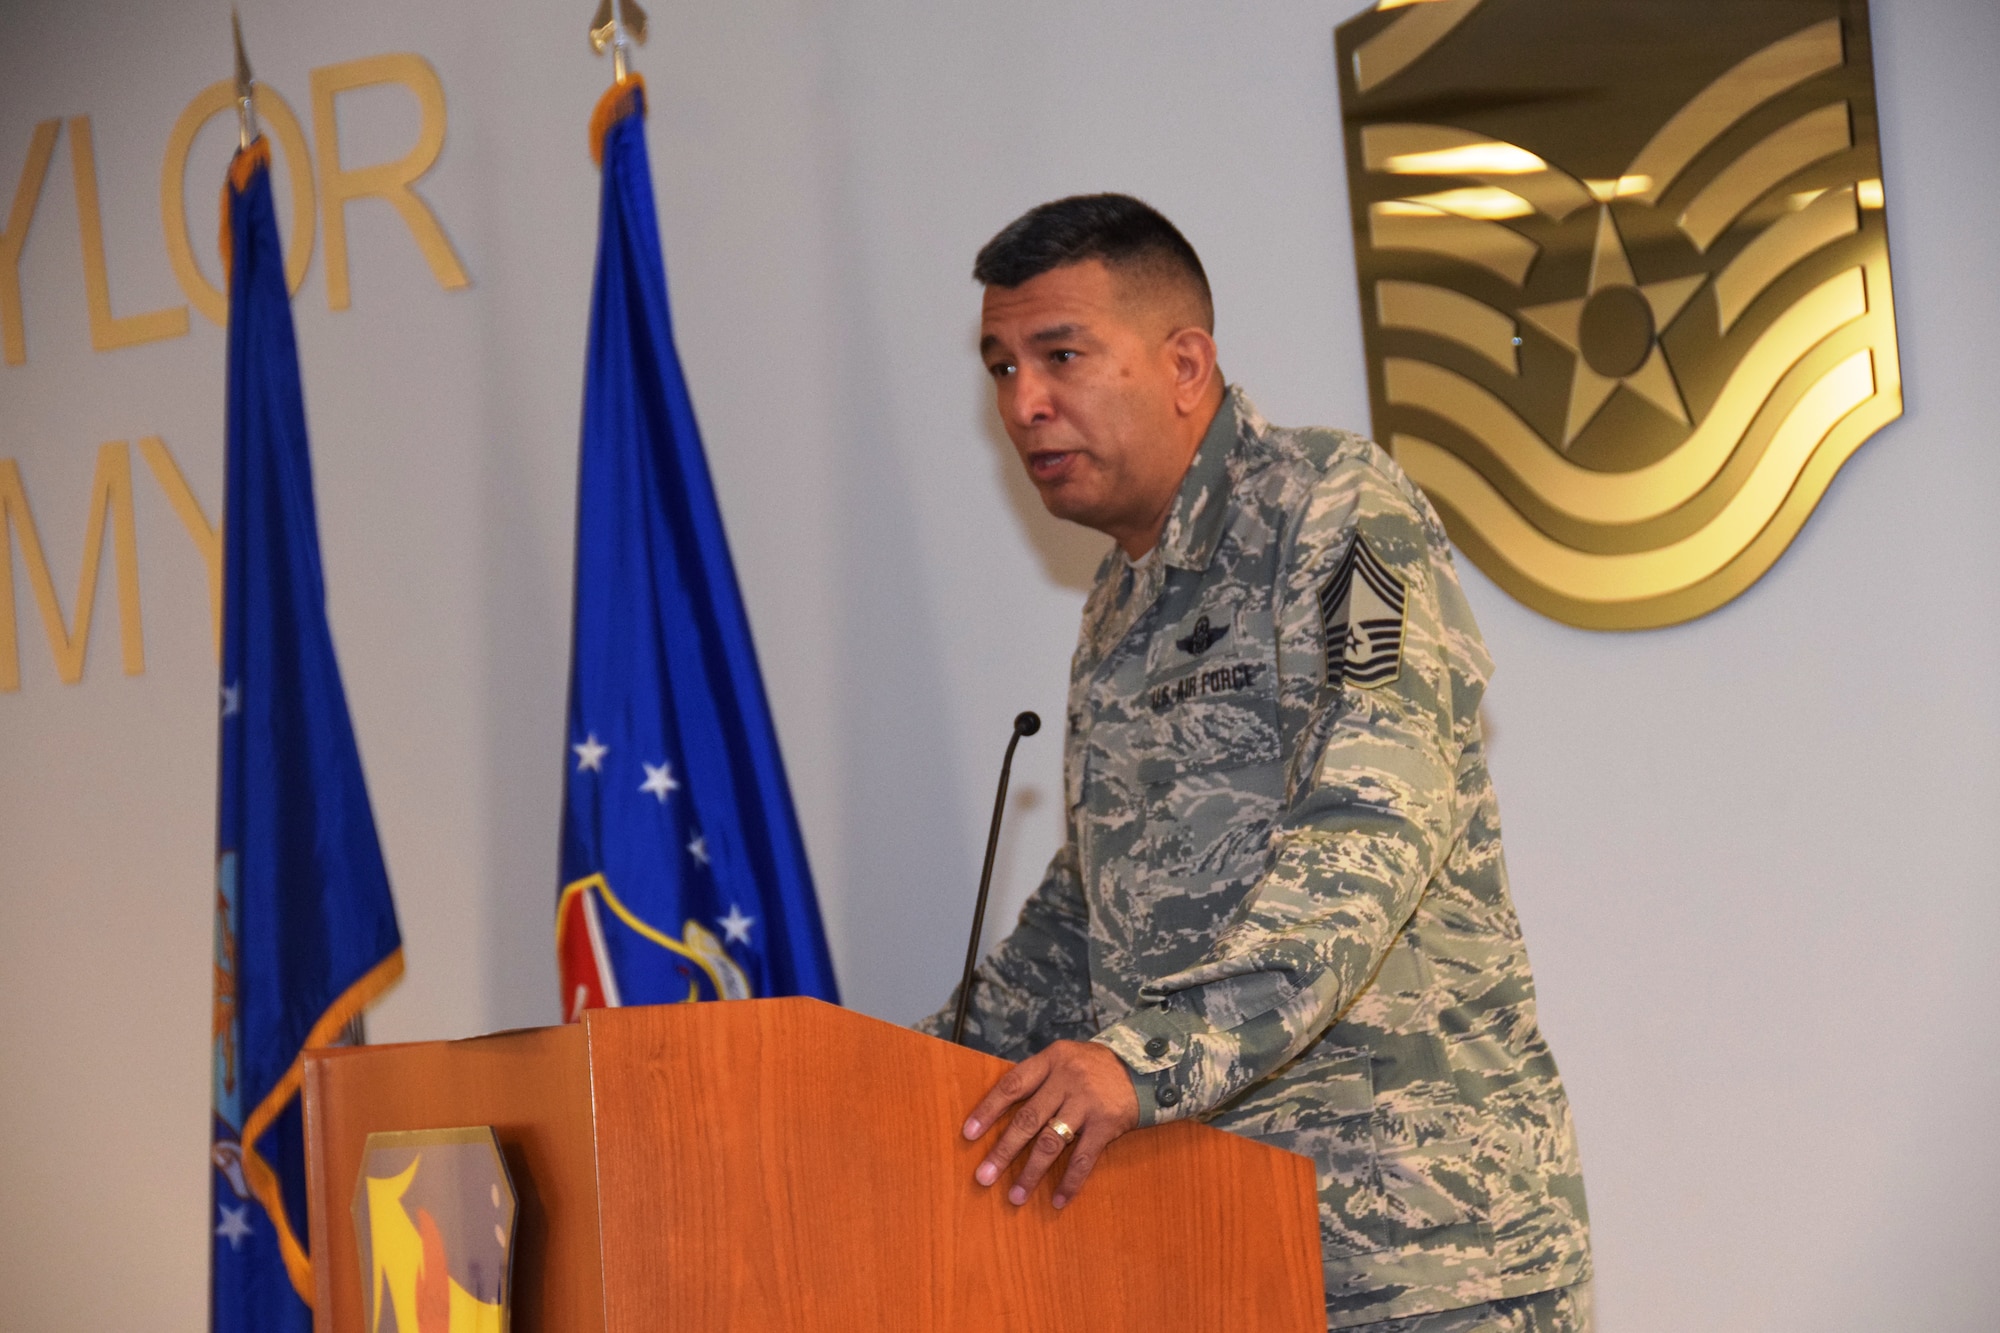 Alamo Wing recognizes newest NCOs at semiannual ceremony